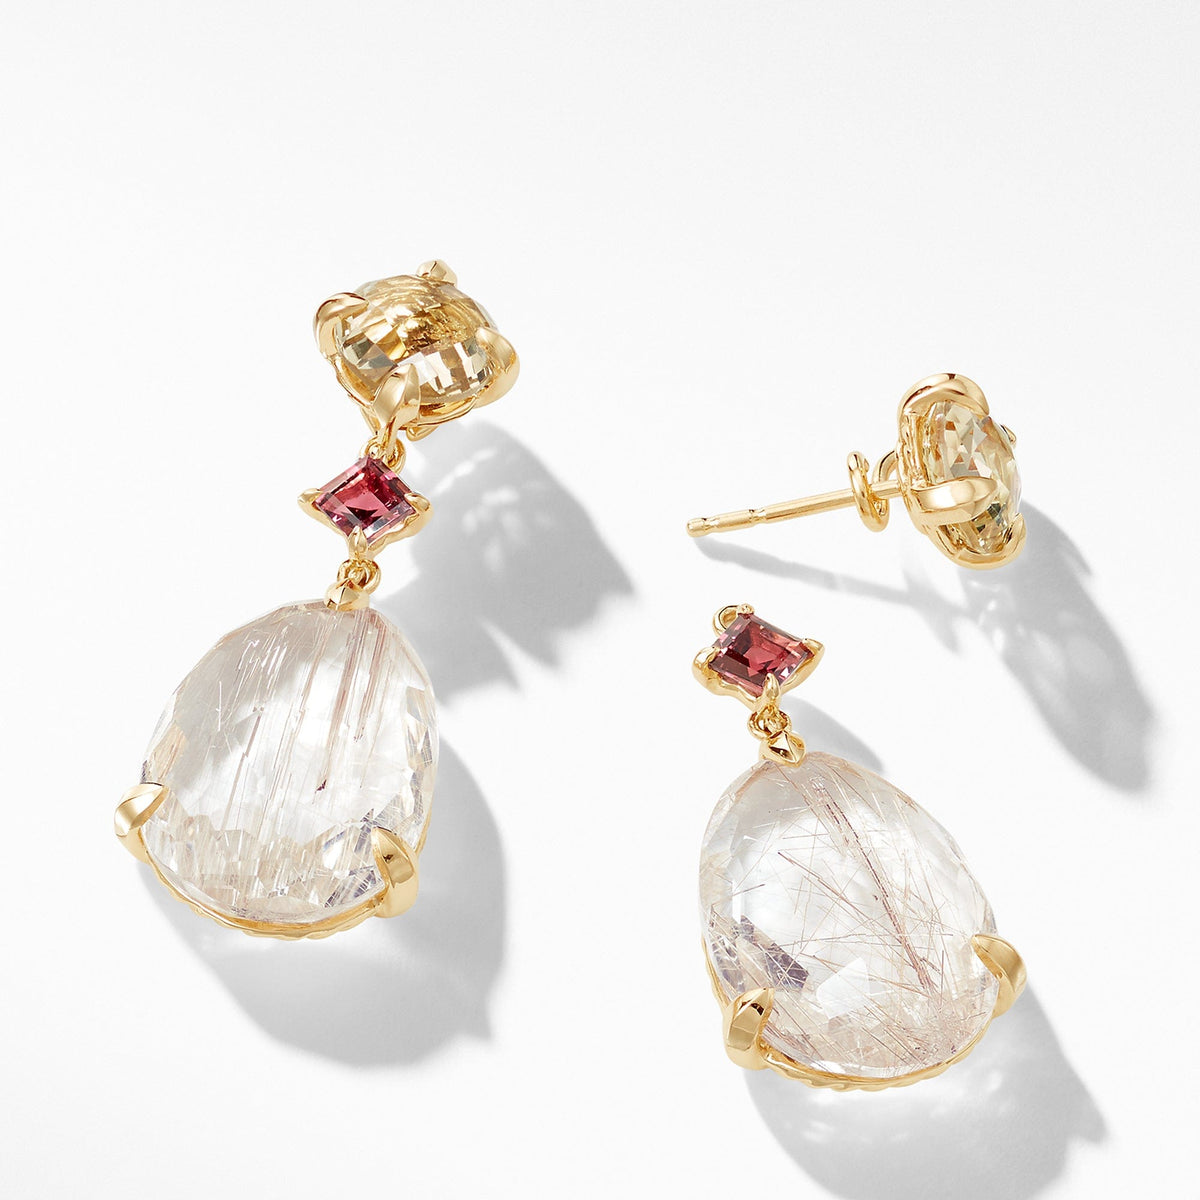 Chatelaine® Drop Earrings in 18K Yellow Gold with Rutilated Quartz, Champagne Citrine, and Pink Tourmaline